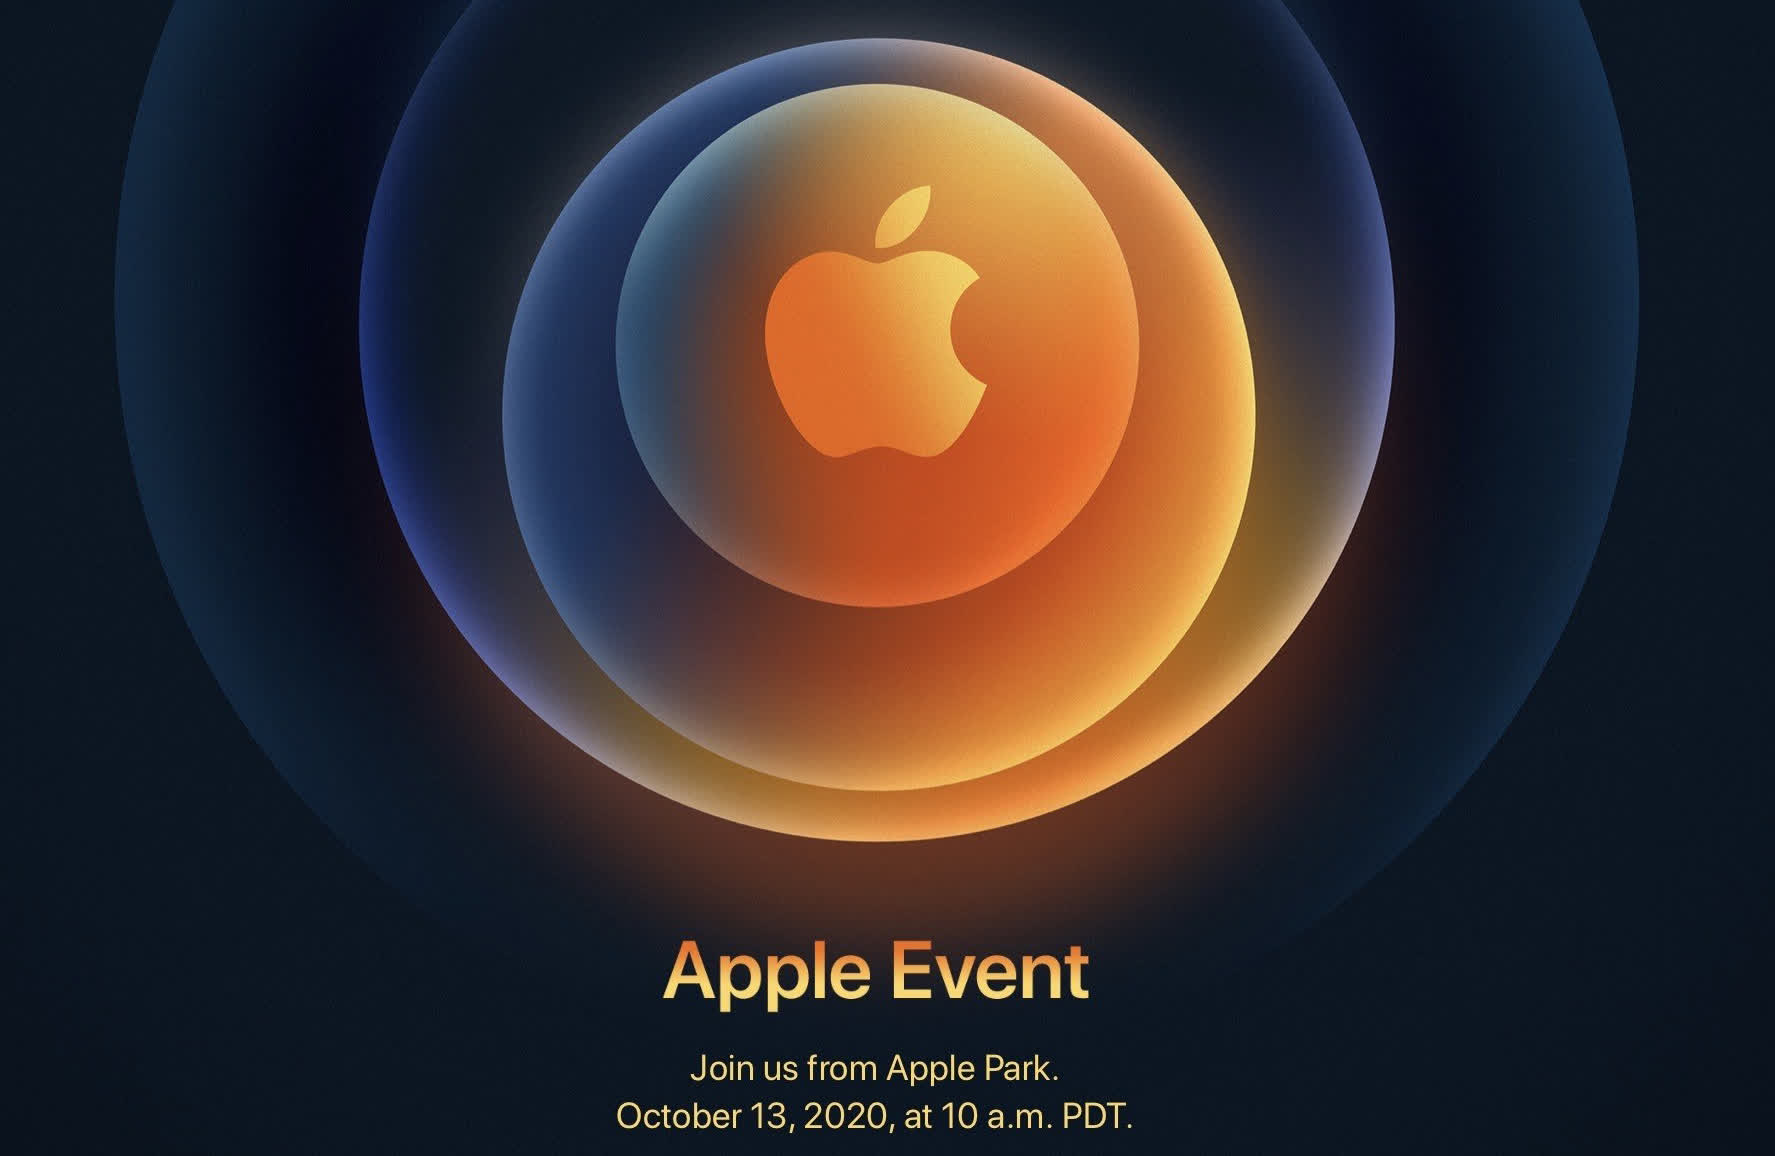 Apple to host iPhone 12 event on October 13